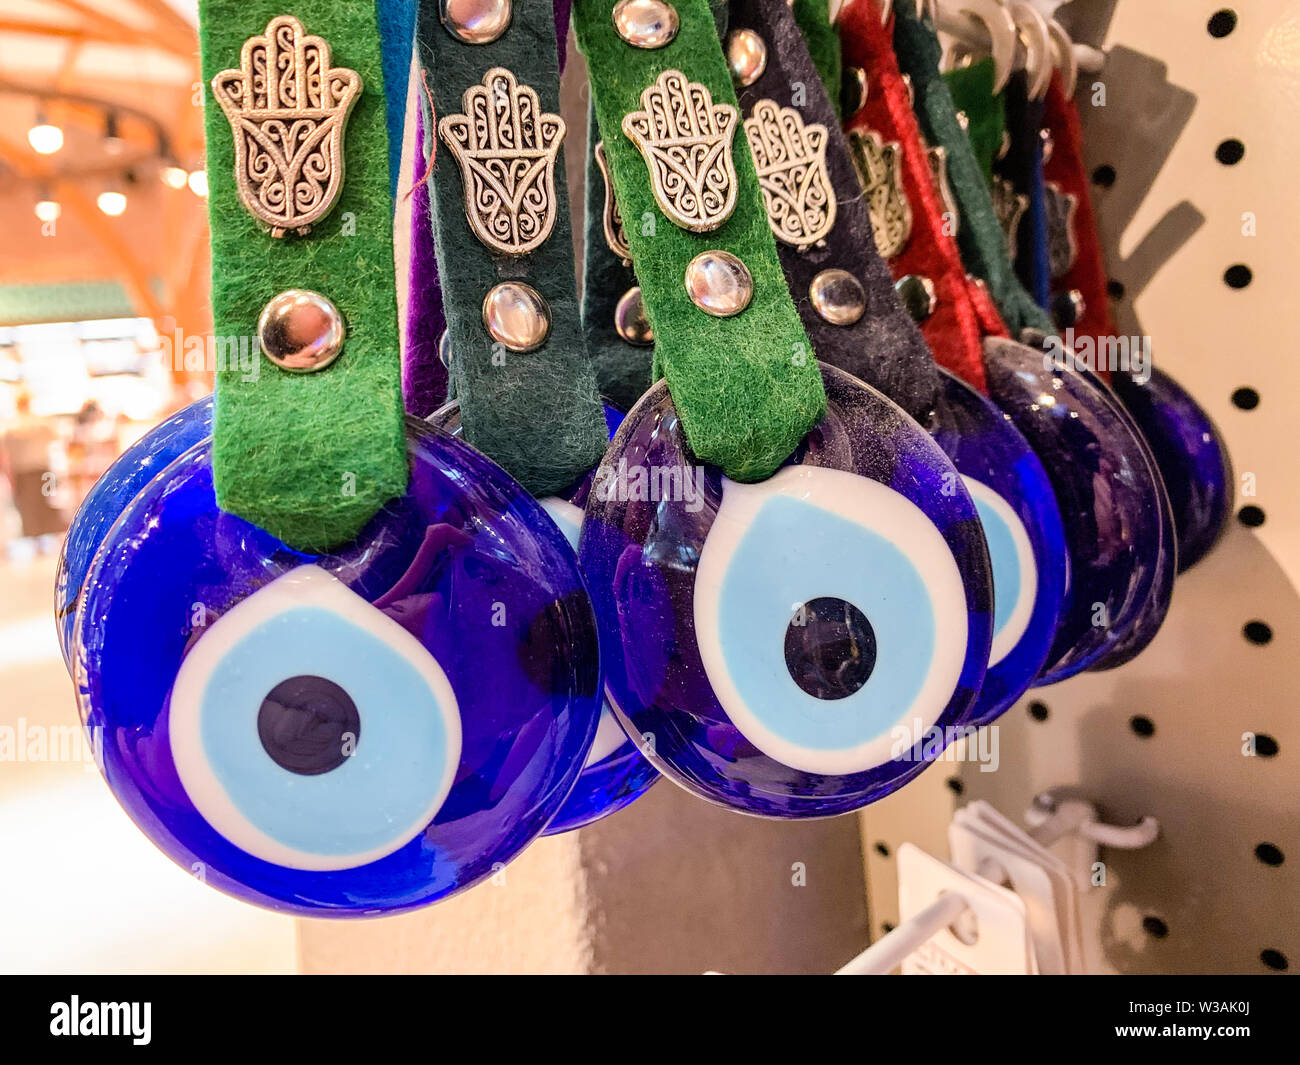 The evil eye Hamsa, a charm made to ward off the evil eye and protect the person wearing it. Traditional Muslim decoration in Turkey and Greece. Stock Photo